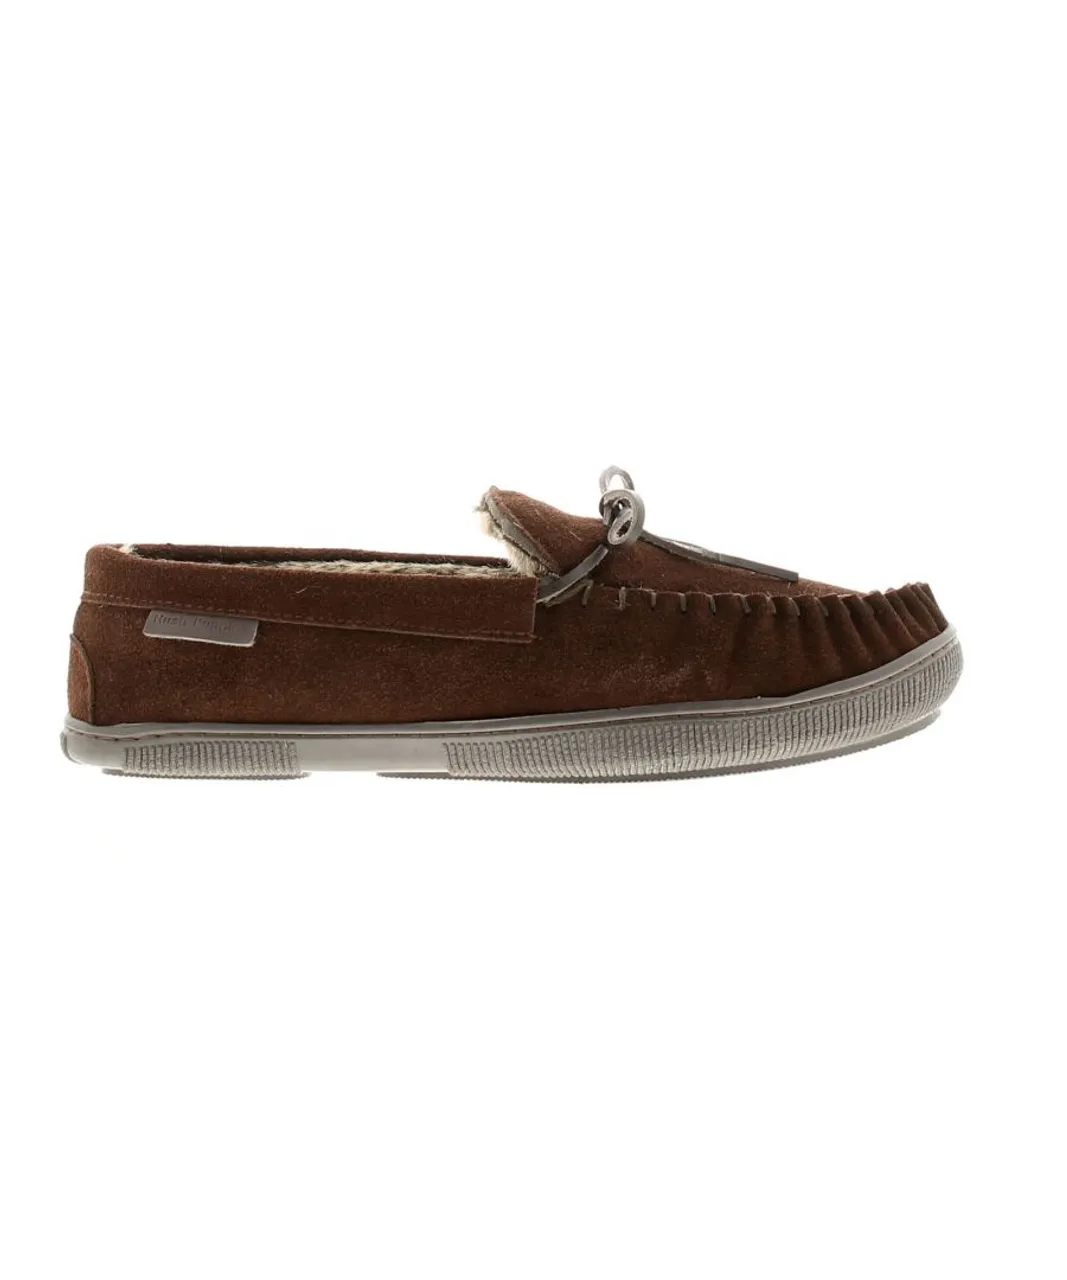 Hush Puppies ace leather mens full slippers chocolate - Brown Suede